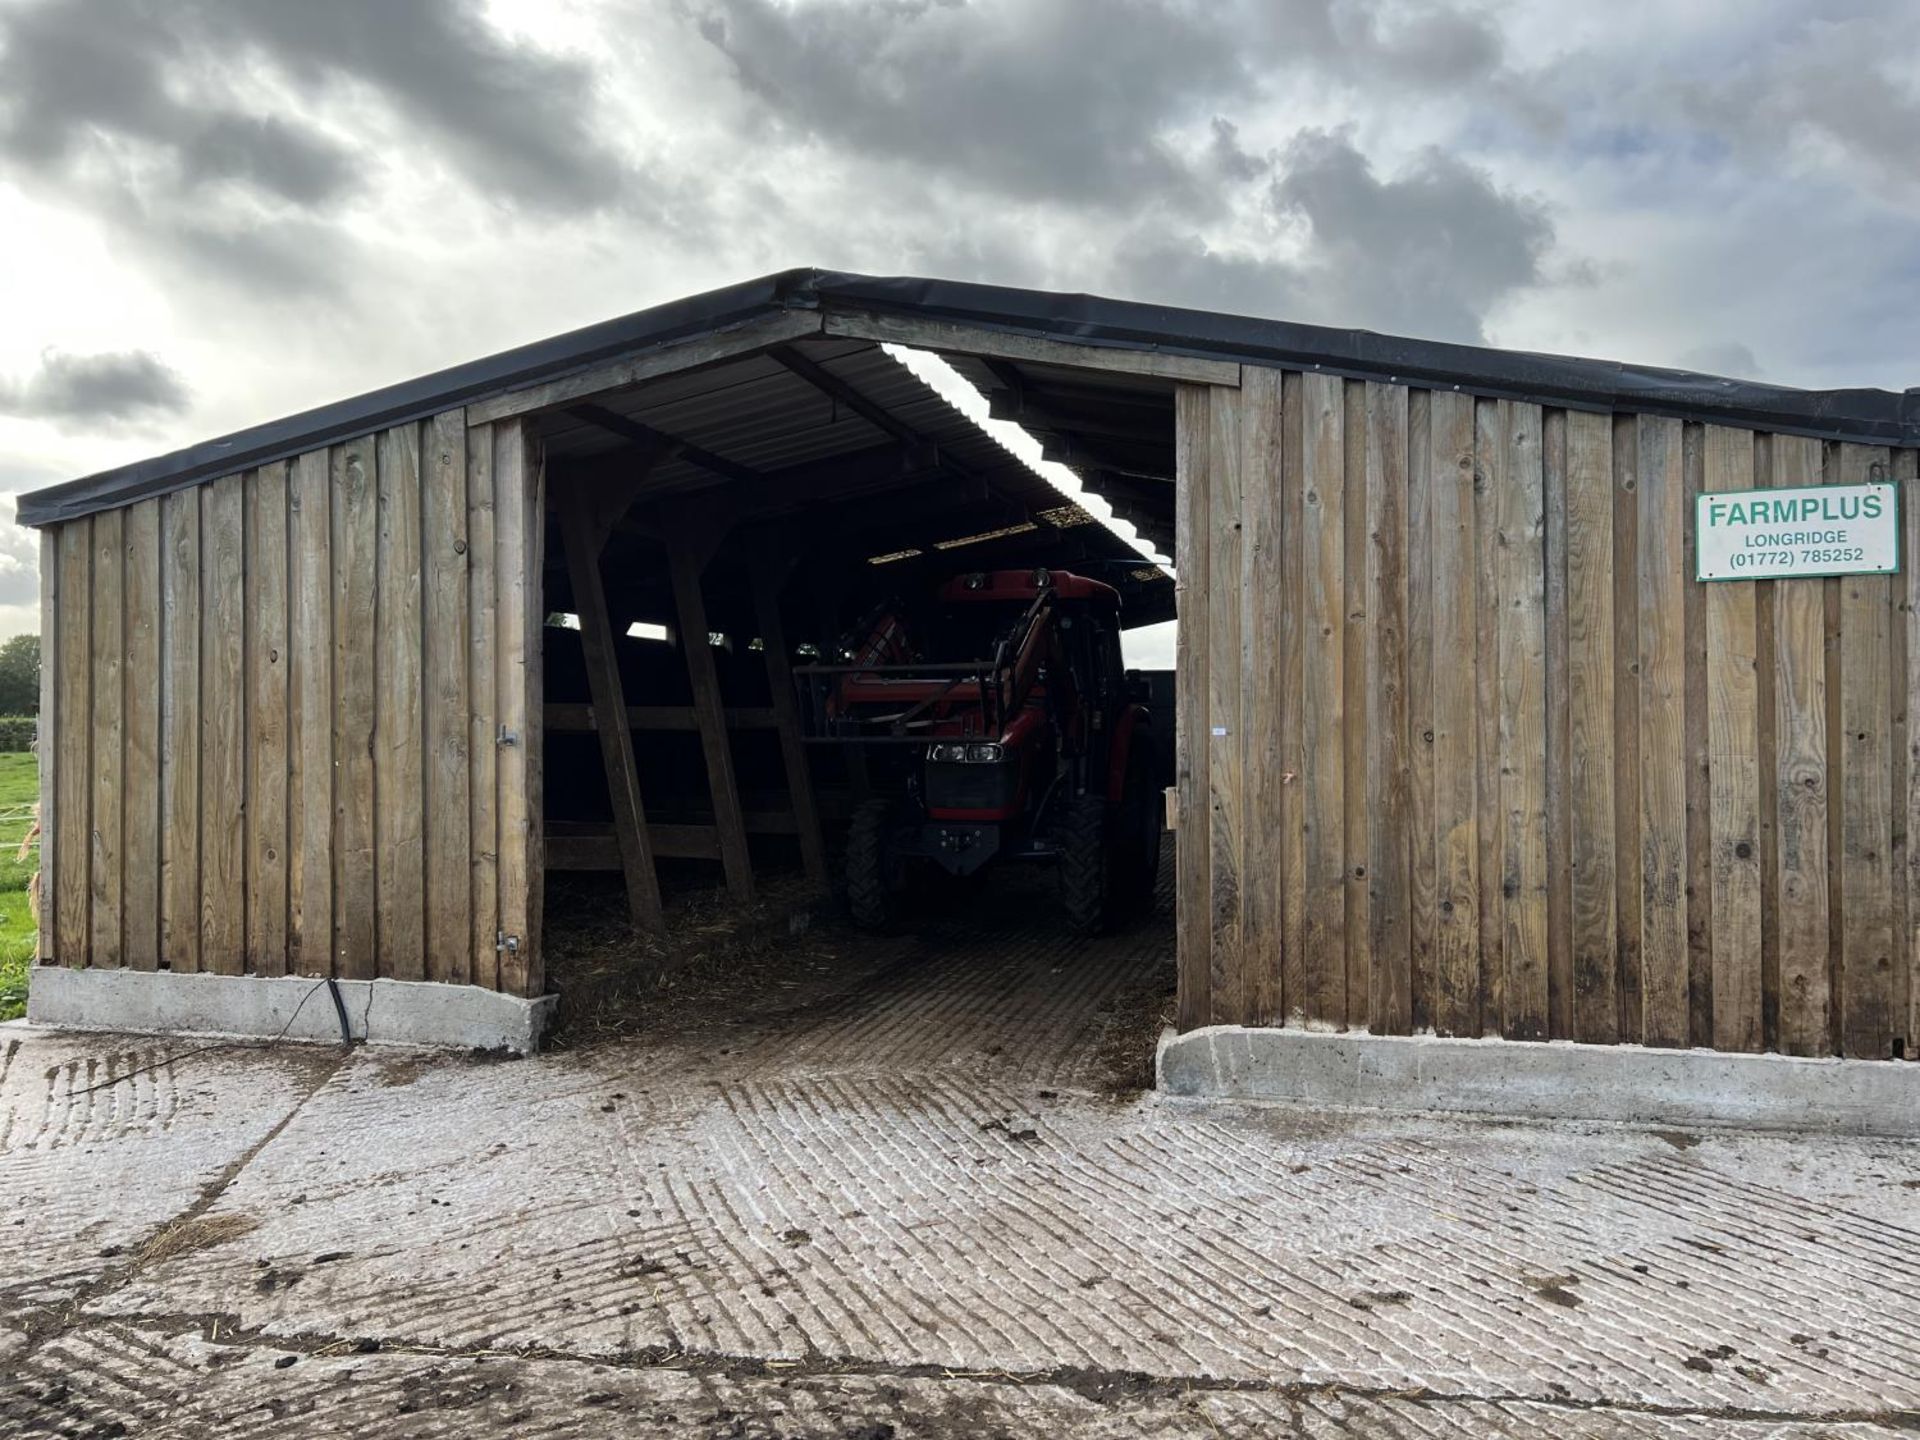 FARMPLUS 26 STALL COW KENNEL -3 WEEKS TO REMOVE. (SHEETED DOOR LOT 208) + VAT